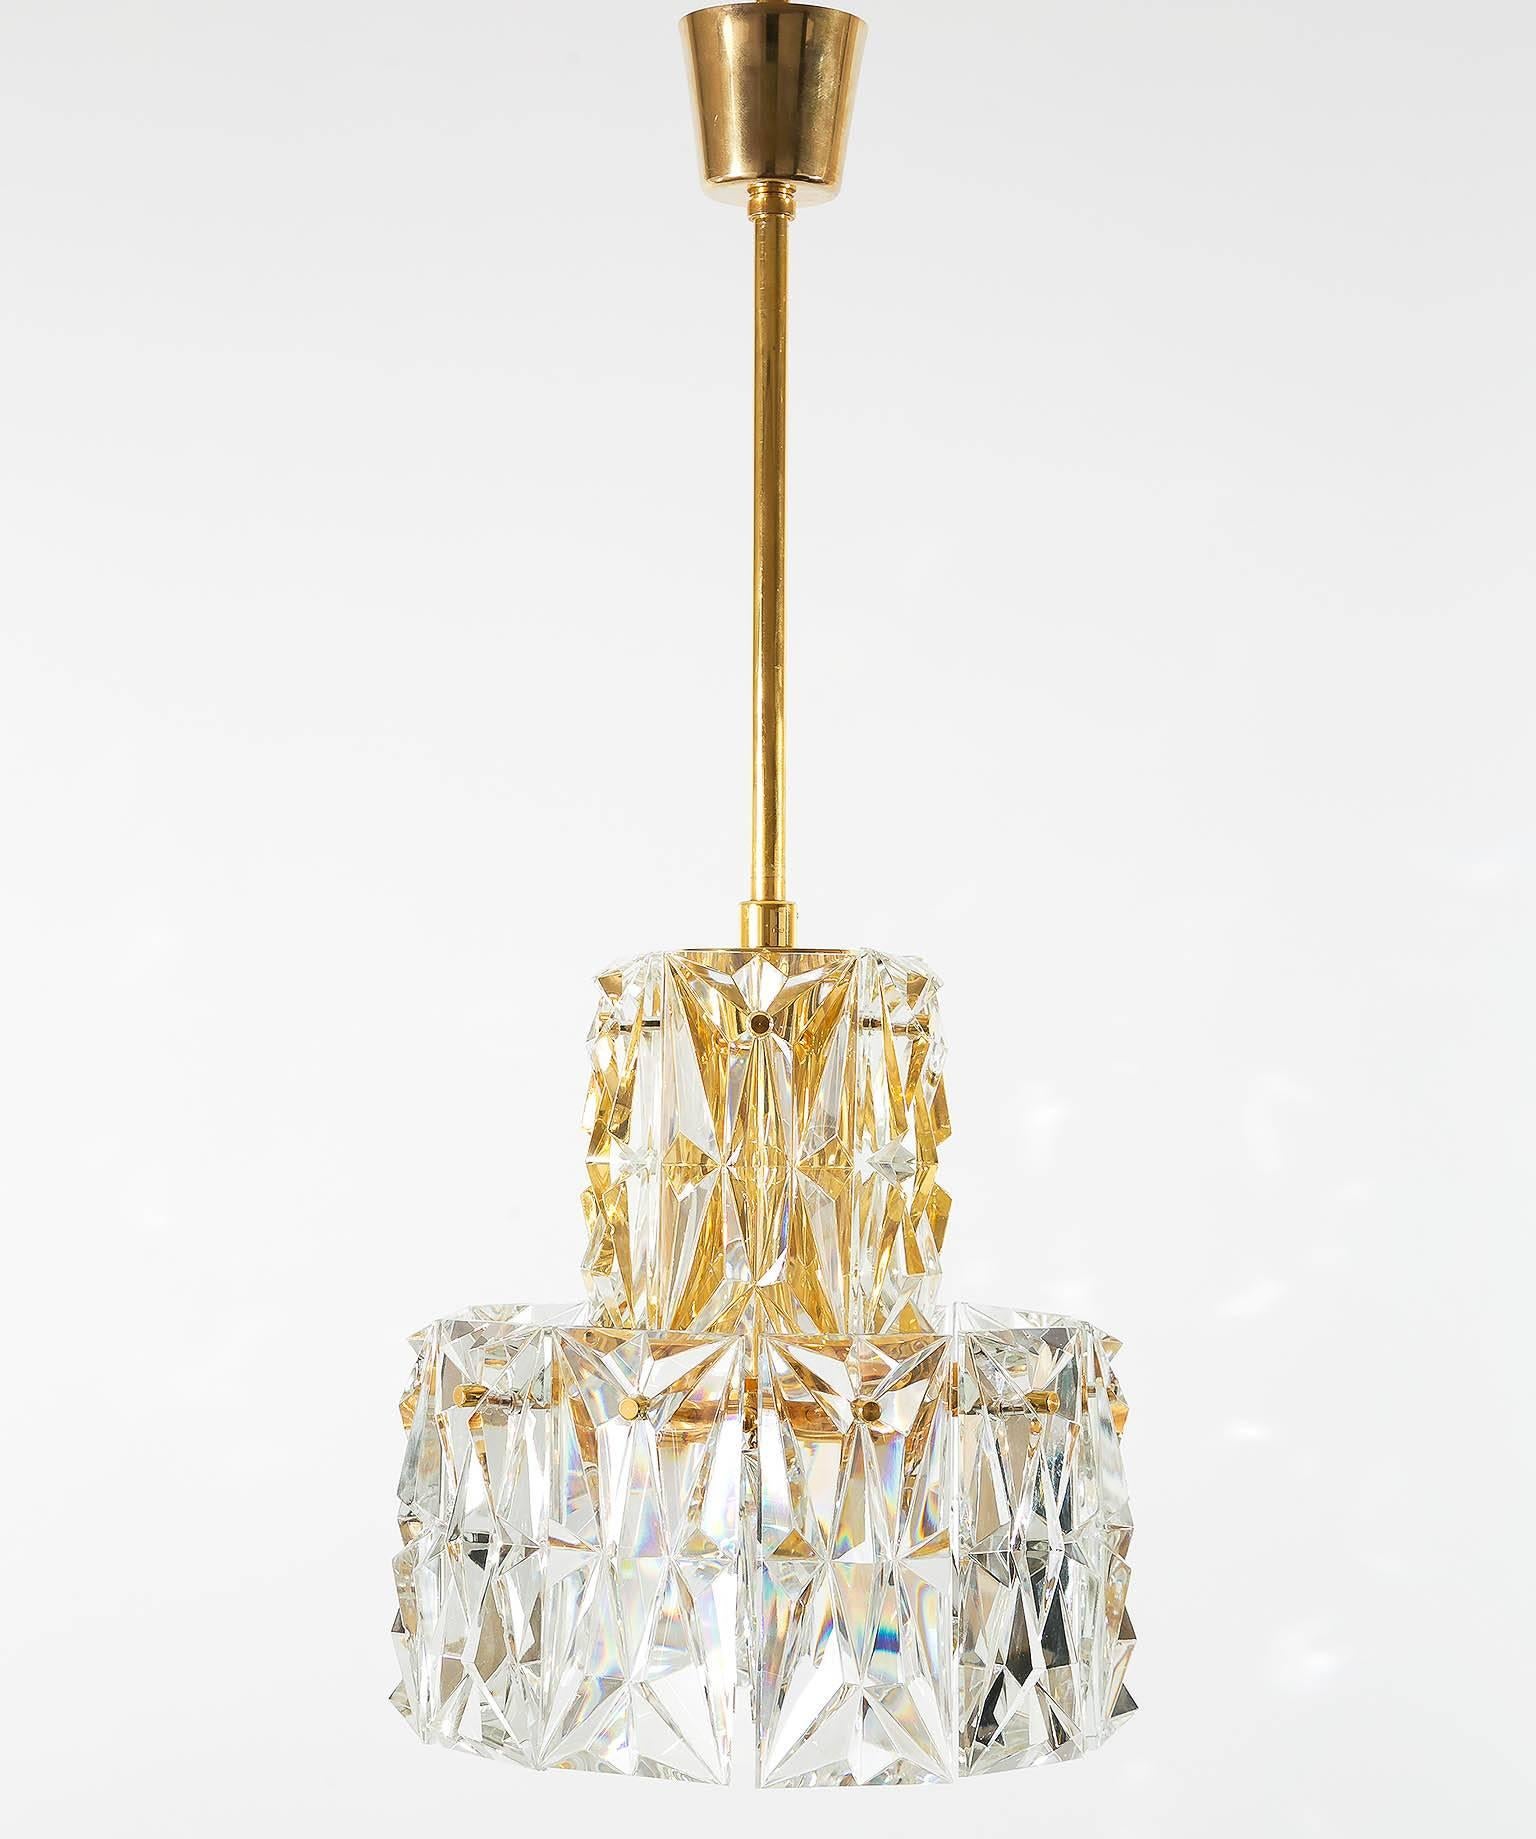 A high quality pendant light fixture made of gold plated brass and large cut crystal glass by Palwa, Germany, manfuactured in Mid-Century, circa 1970 (late 1960s or early 1970s). The light is in excellent refurbished condition.
The lamp has one